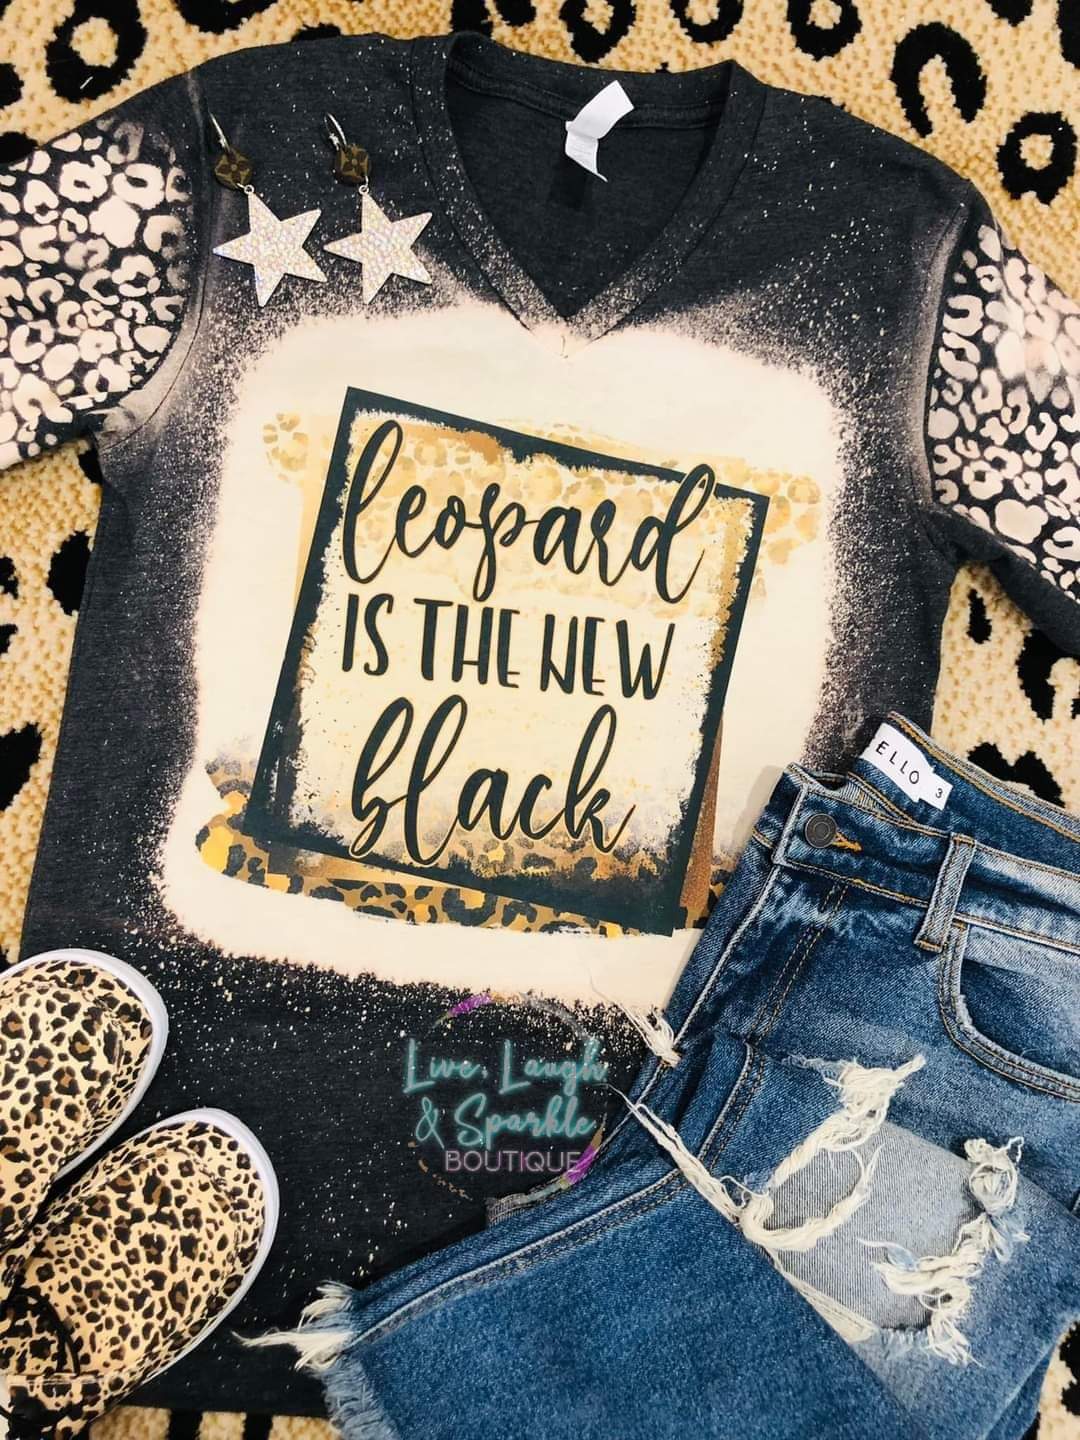 Black bleach tee with leopard print sleeves and words that say leopard is the new black.